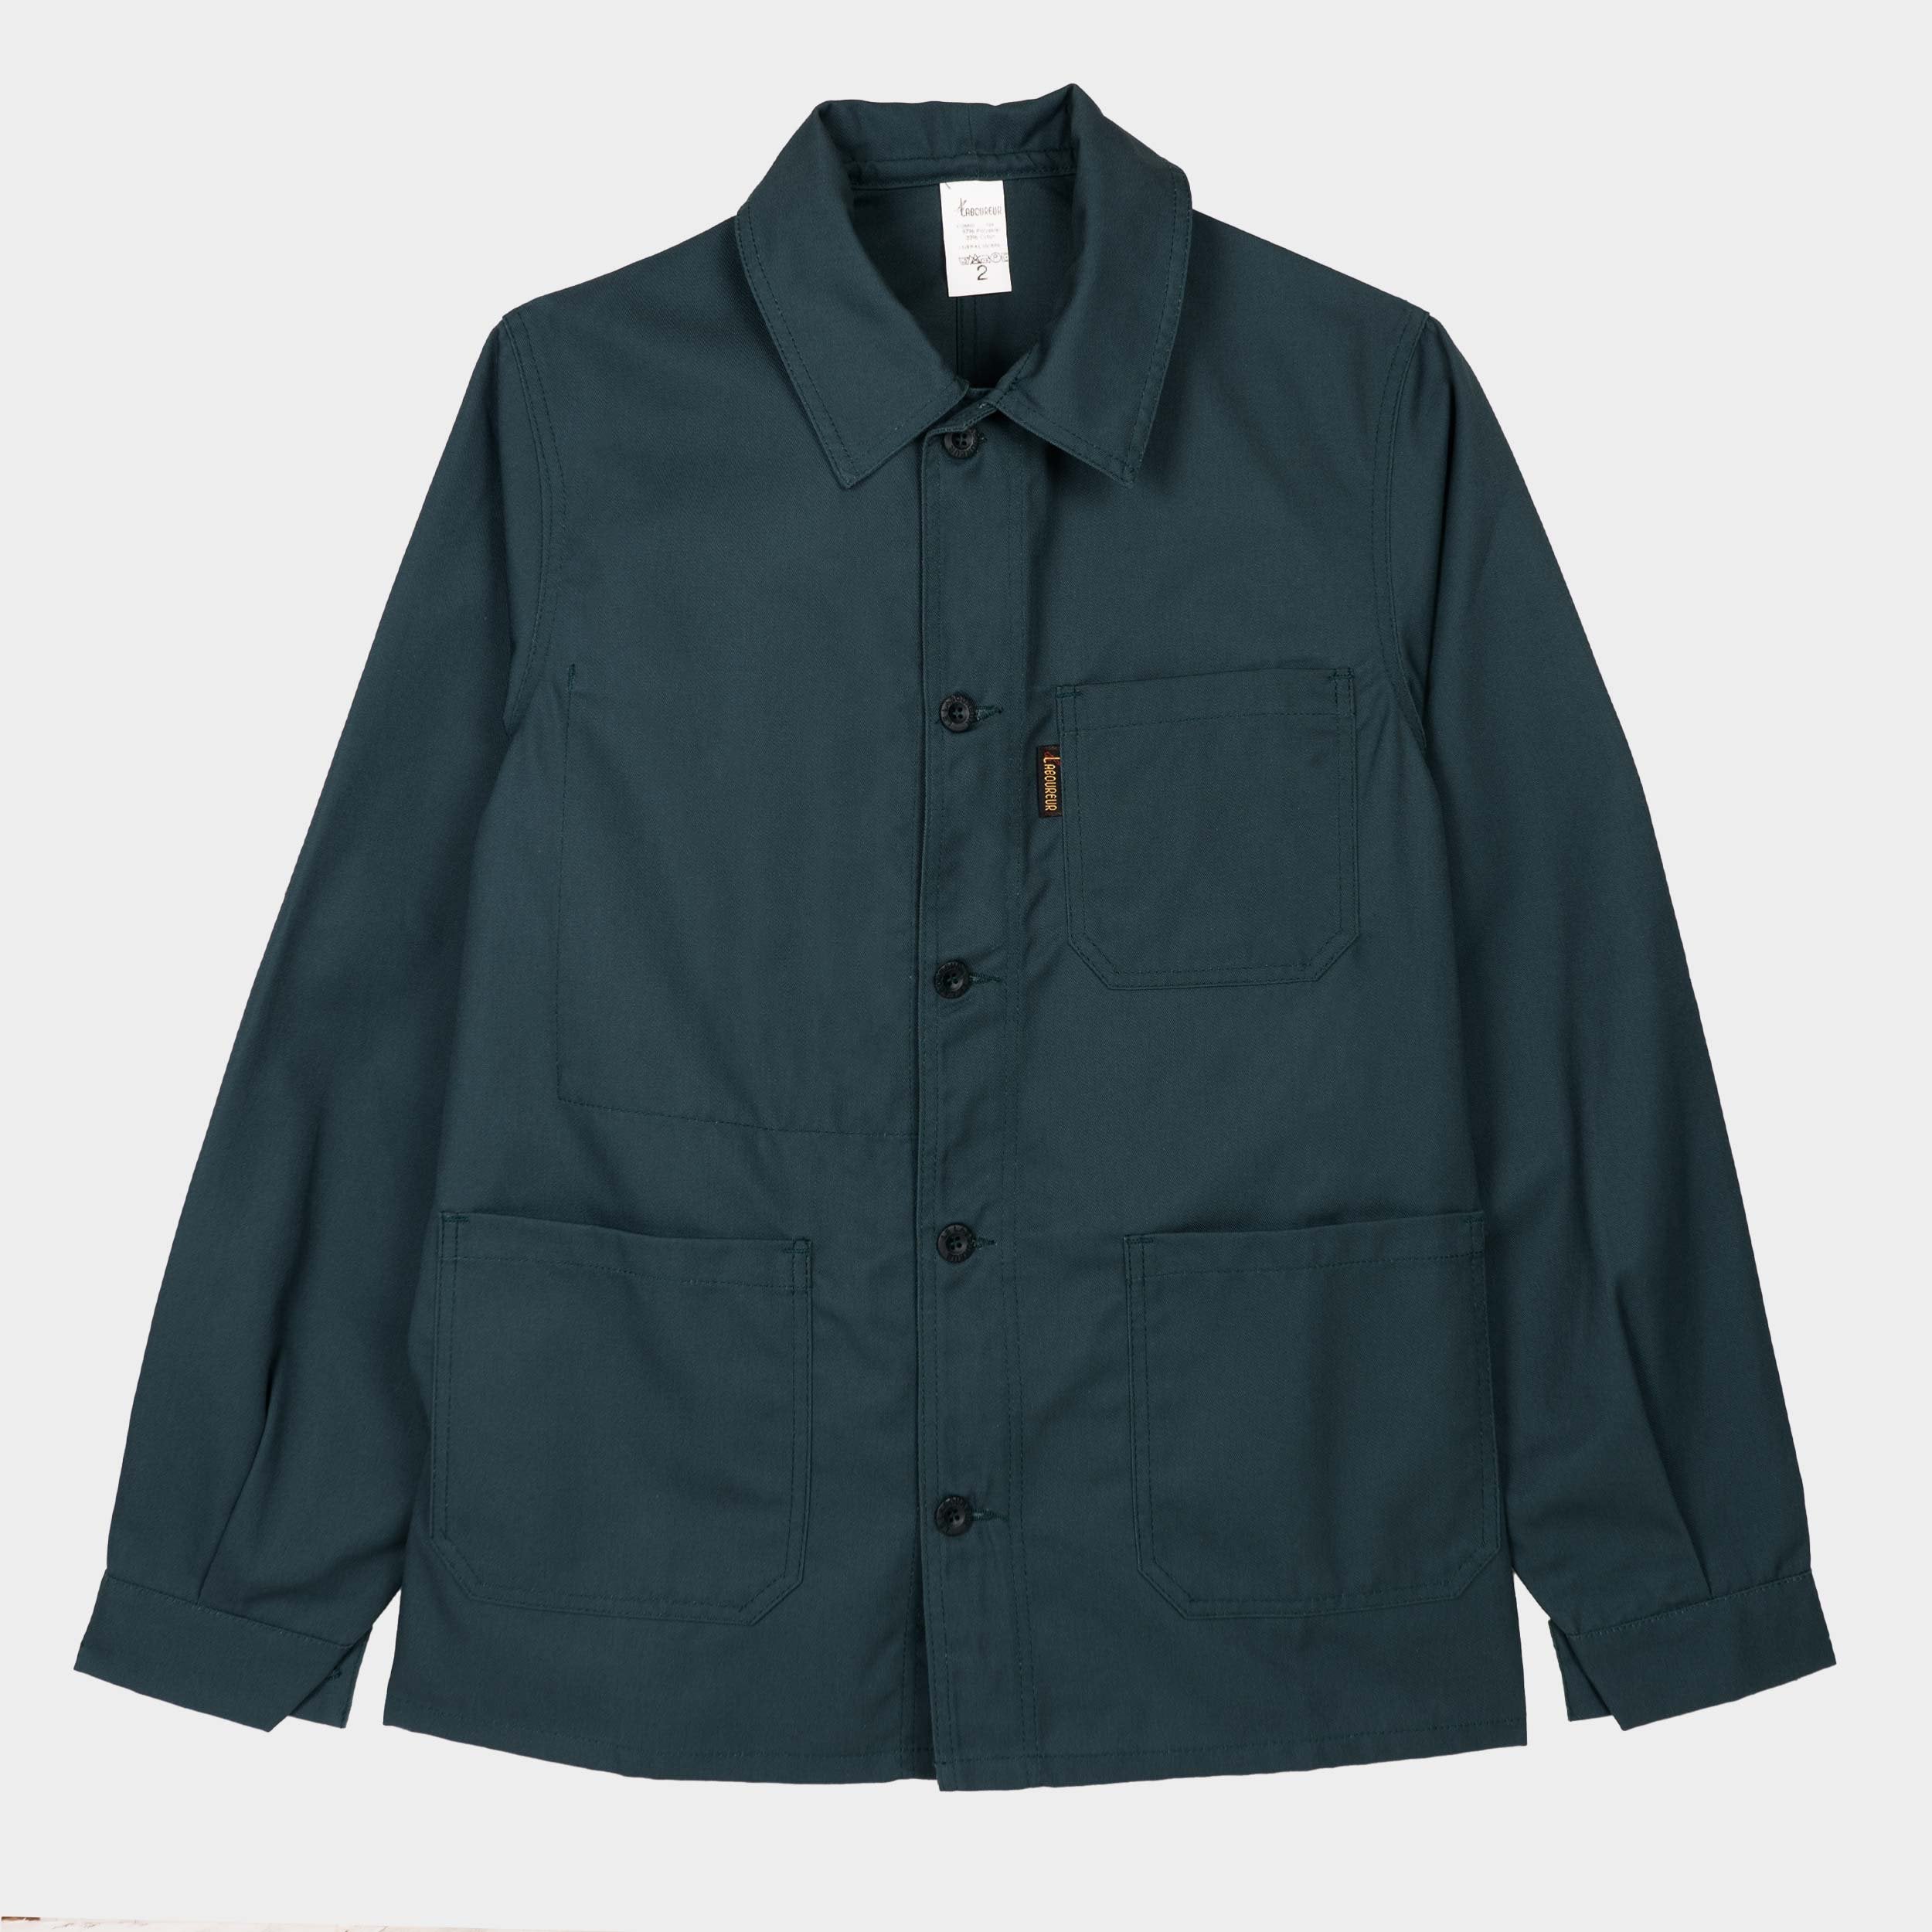 Le Laboureur Work Jacket in French Green